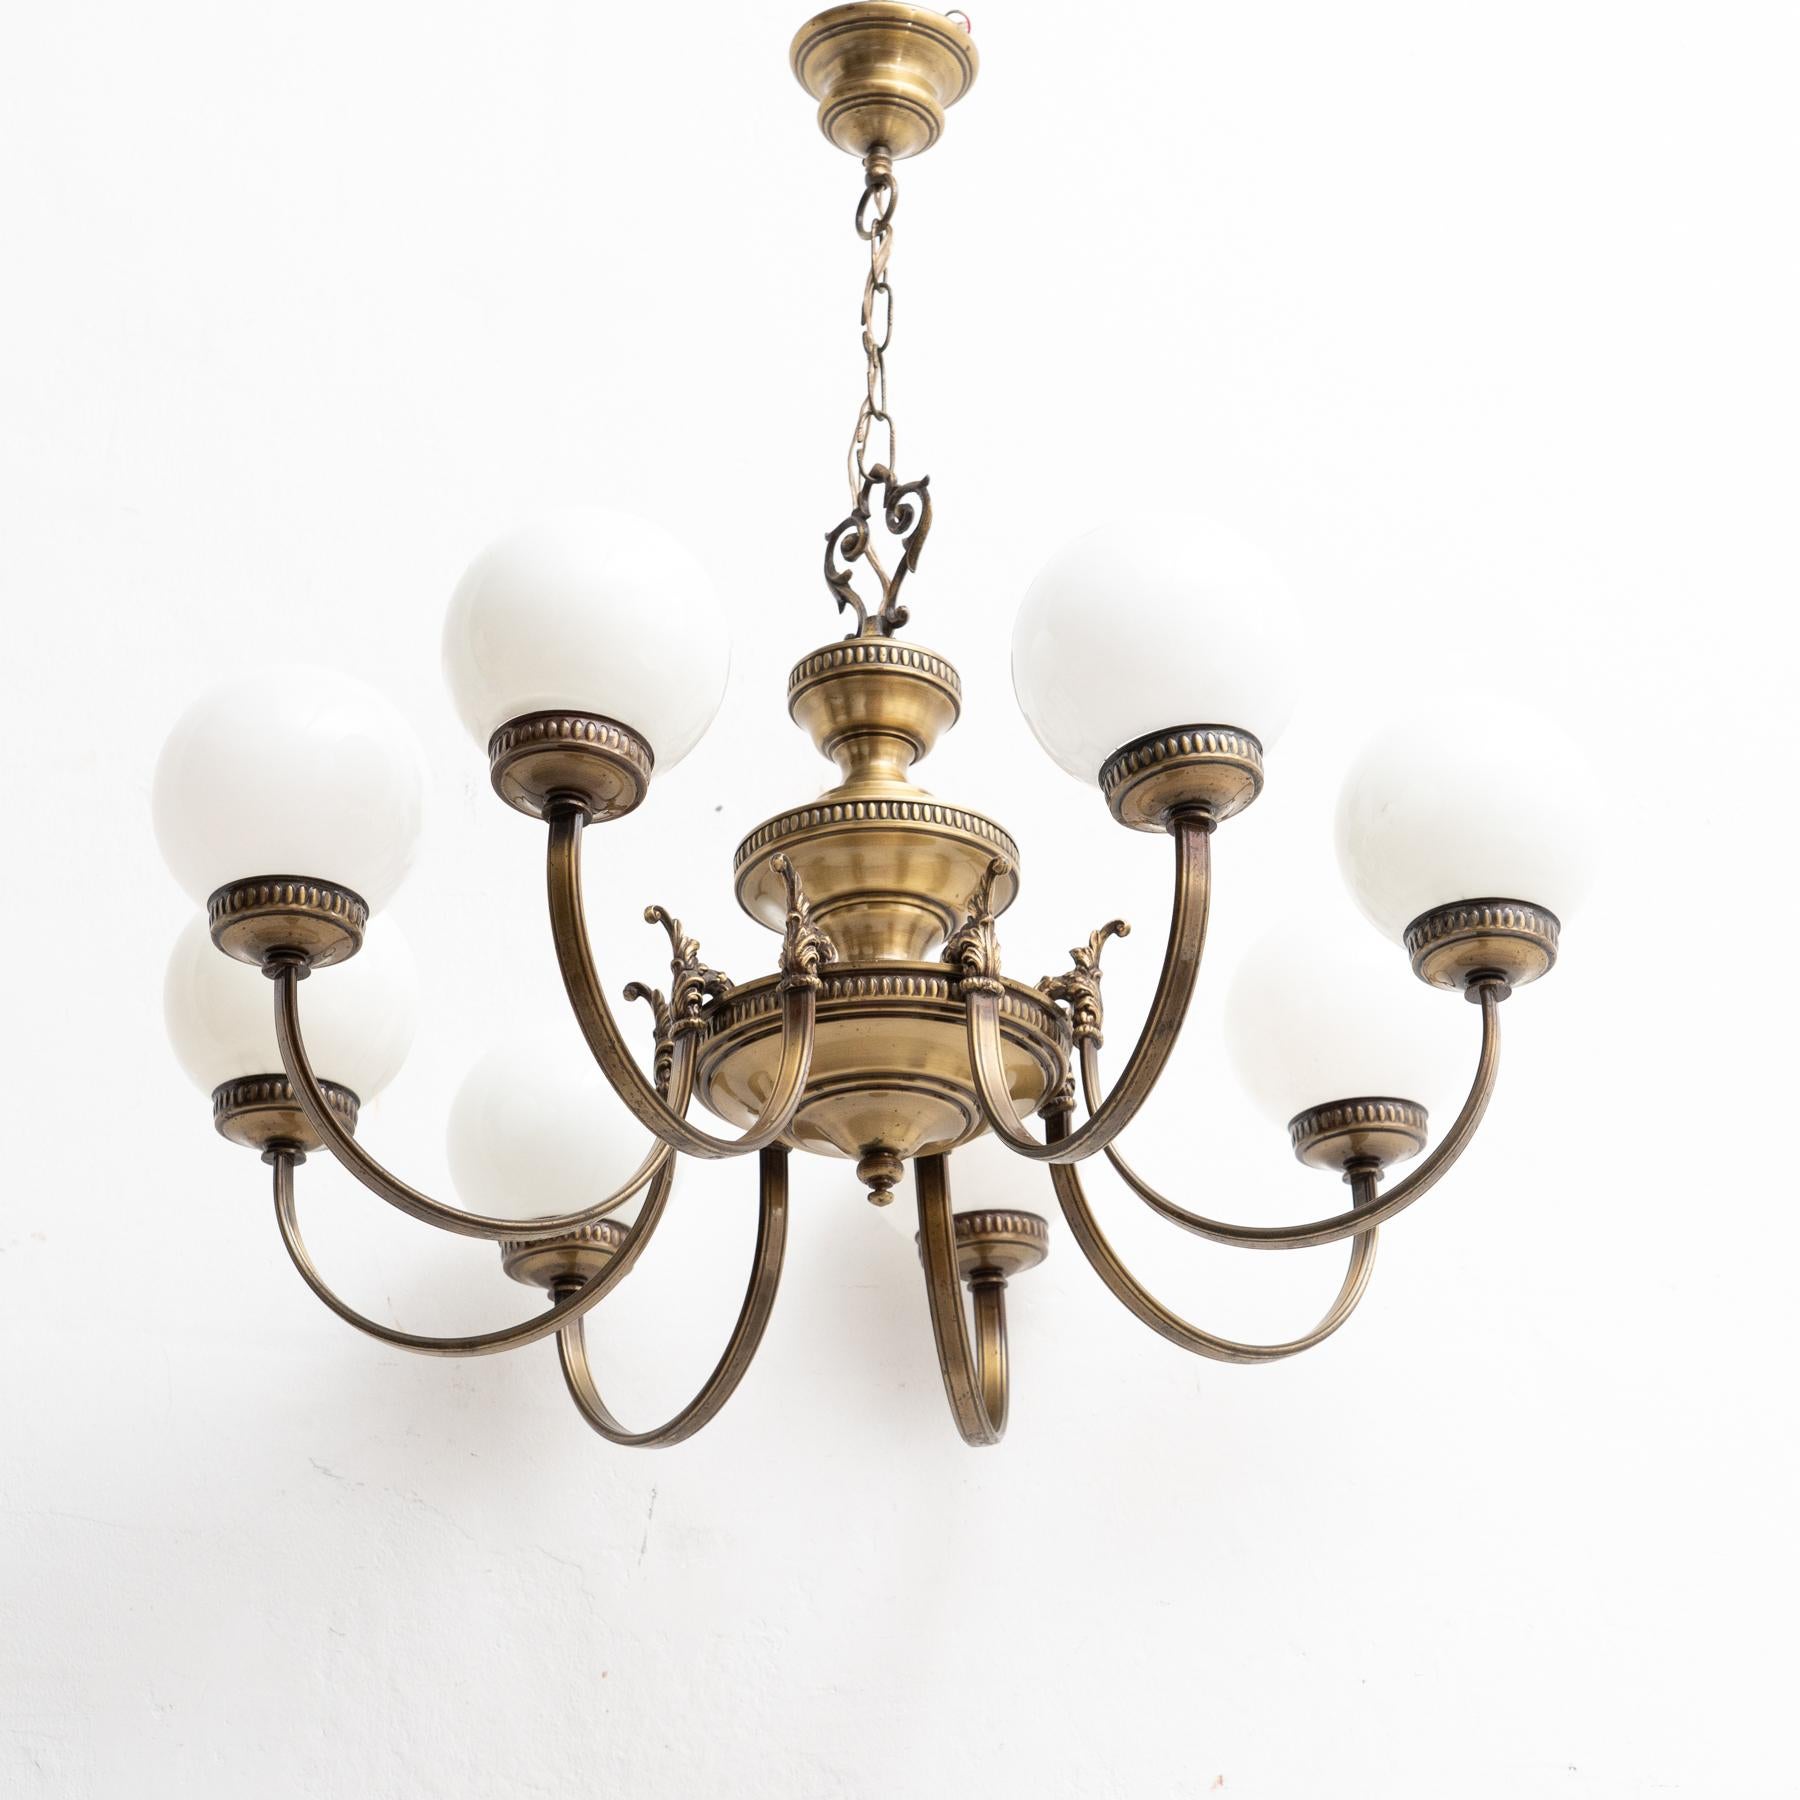 Mid-20th Century Vintage French Brass and Glass Ceiling Lamp circa 1950